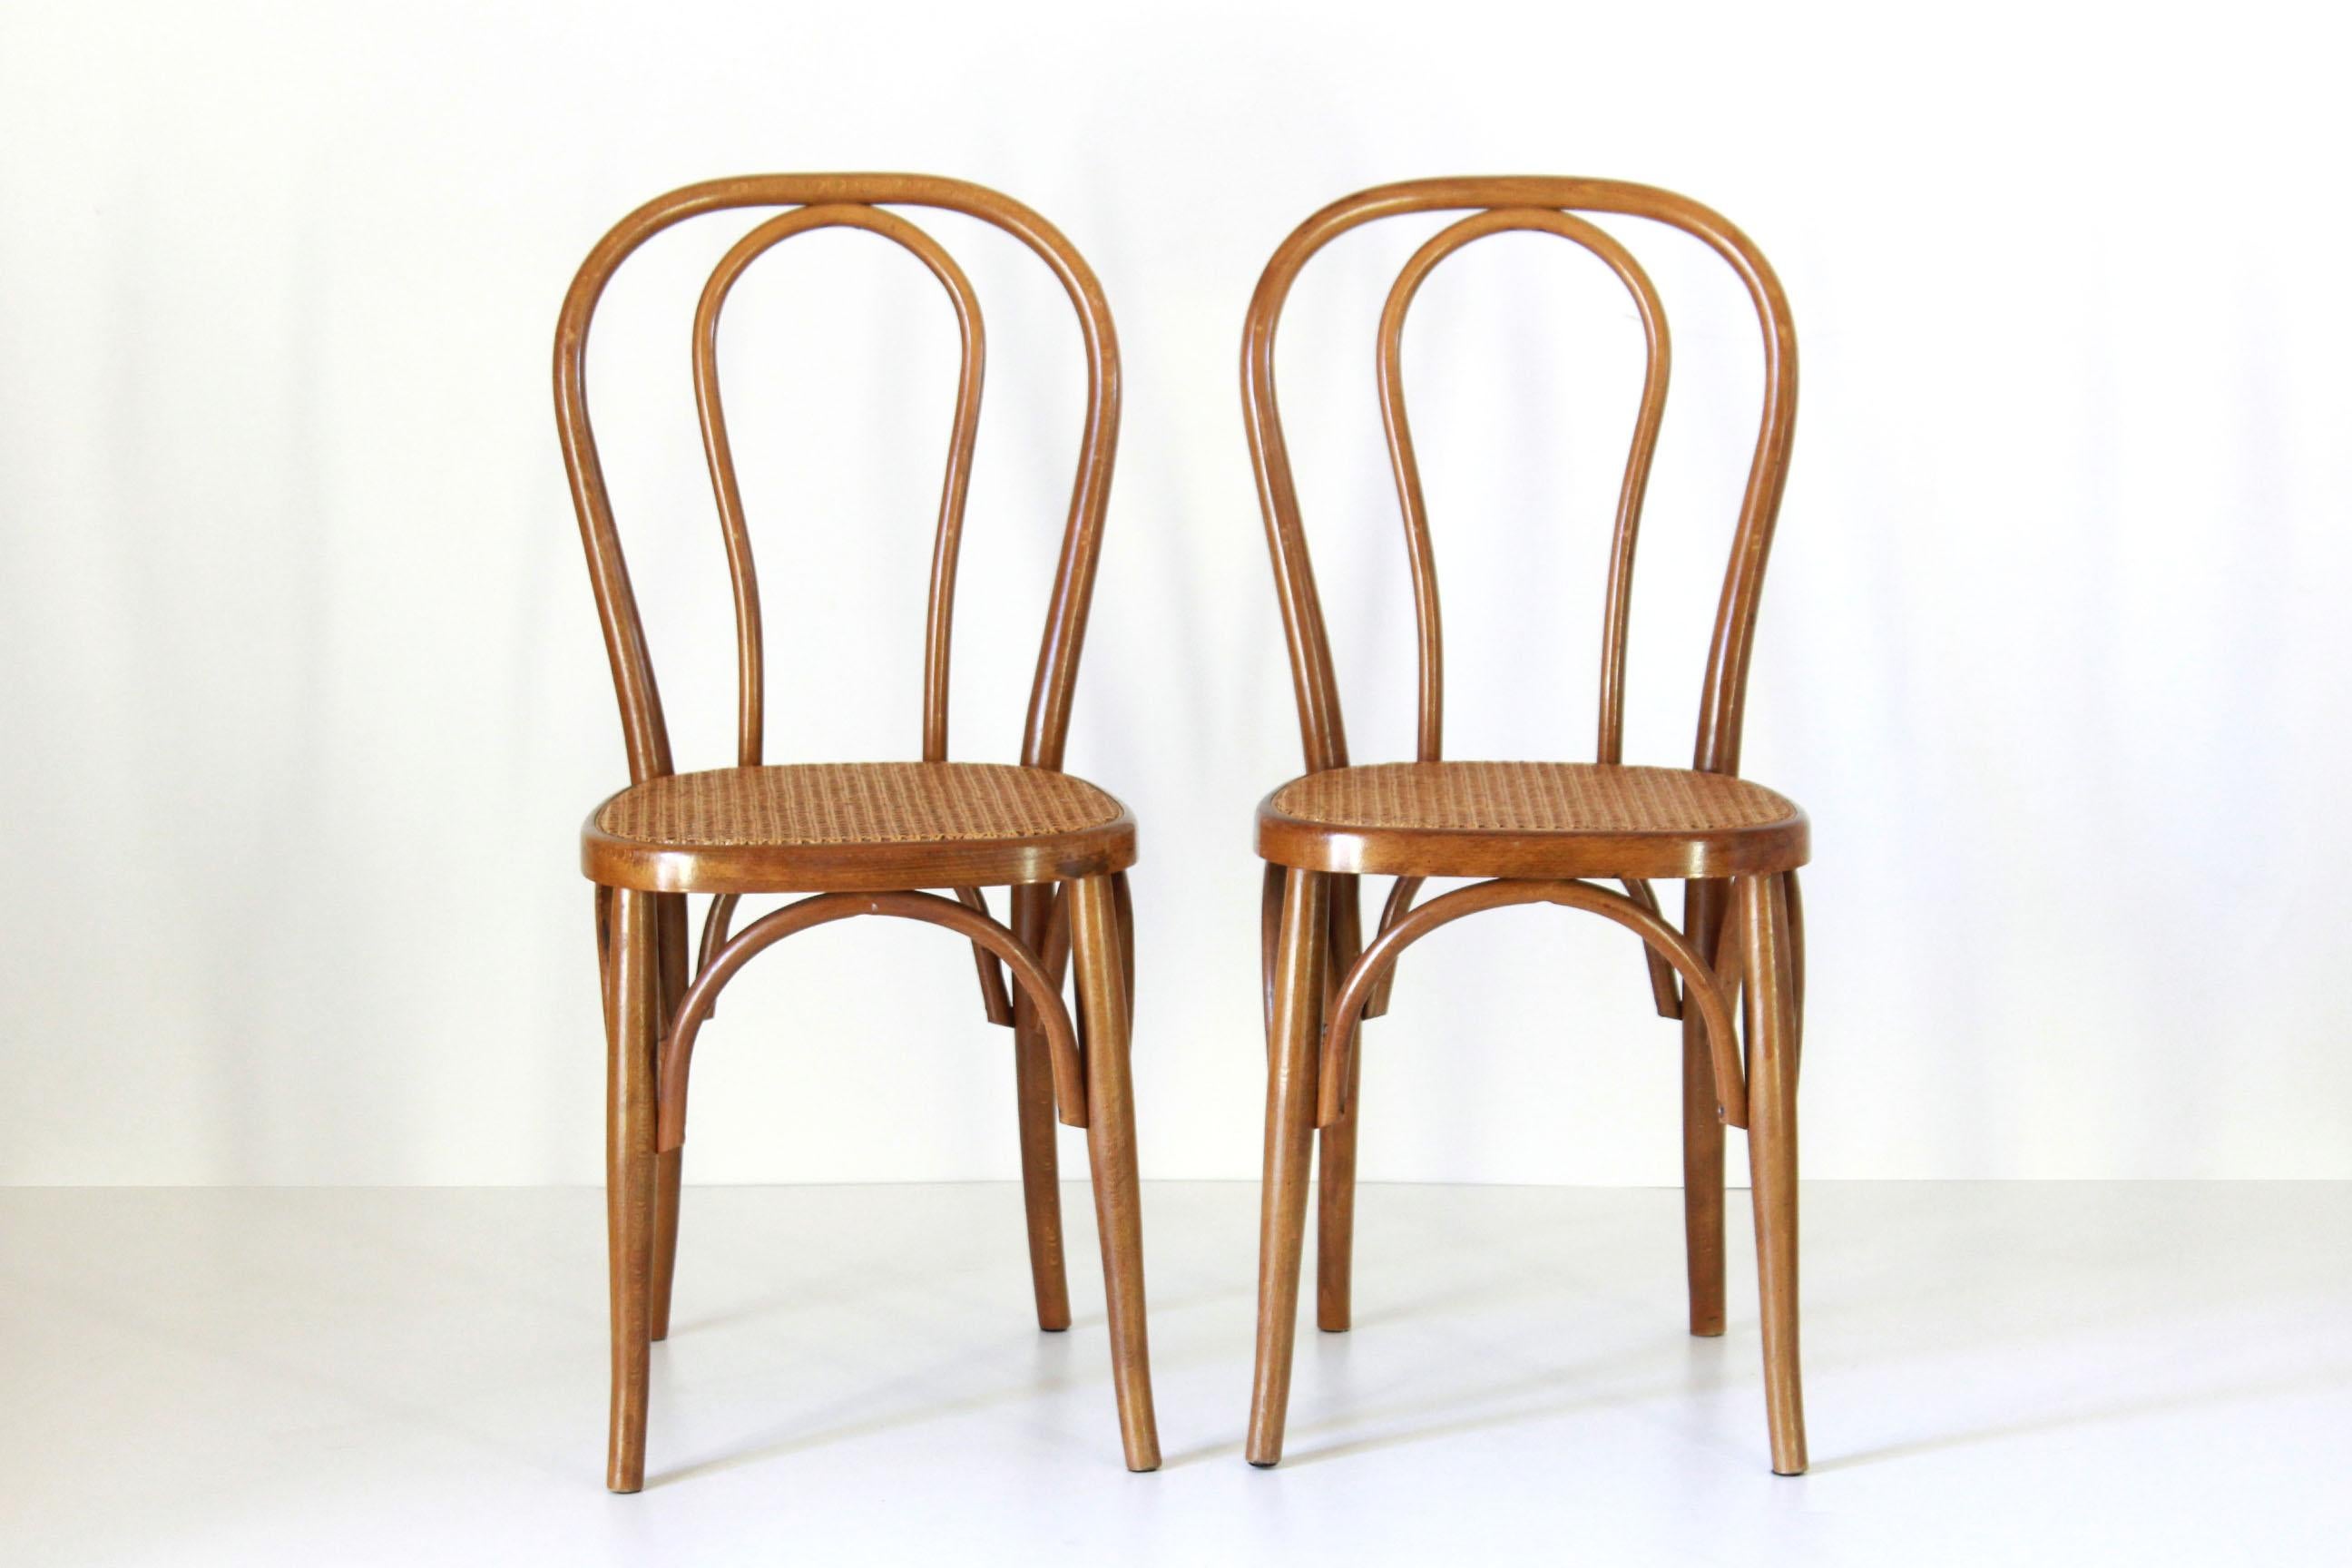 Two early 20th century Thonet style chairs with curved wood structure and wien cane seat. In very good conditions with only few signs of time.